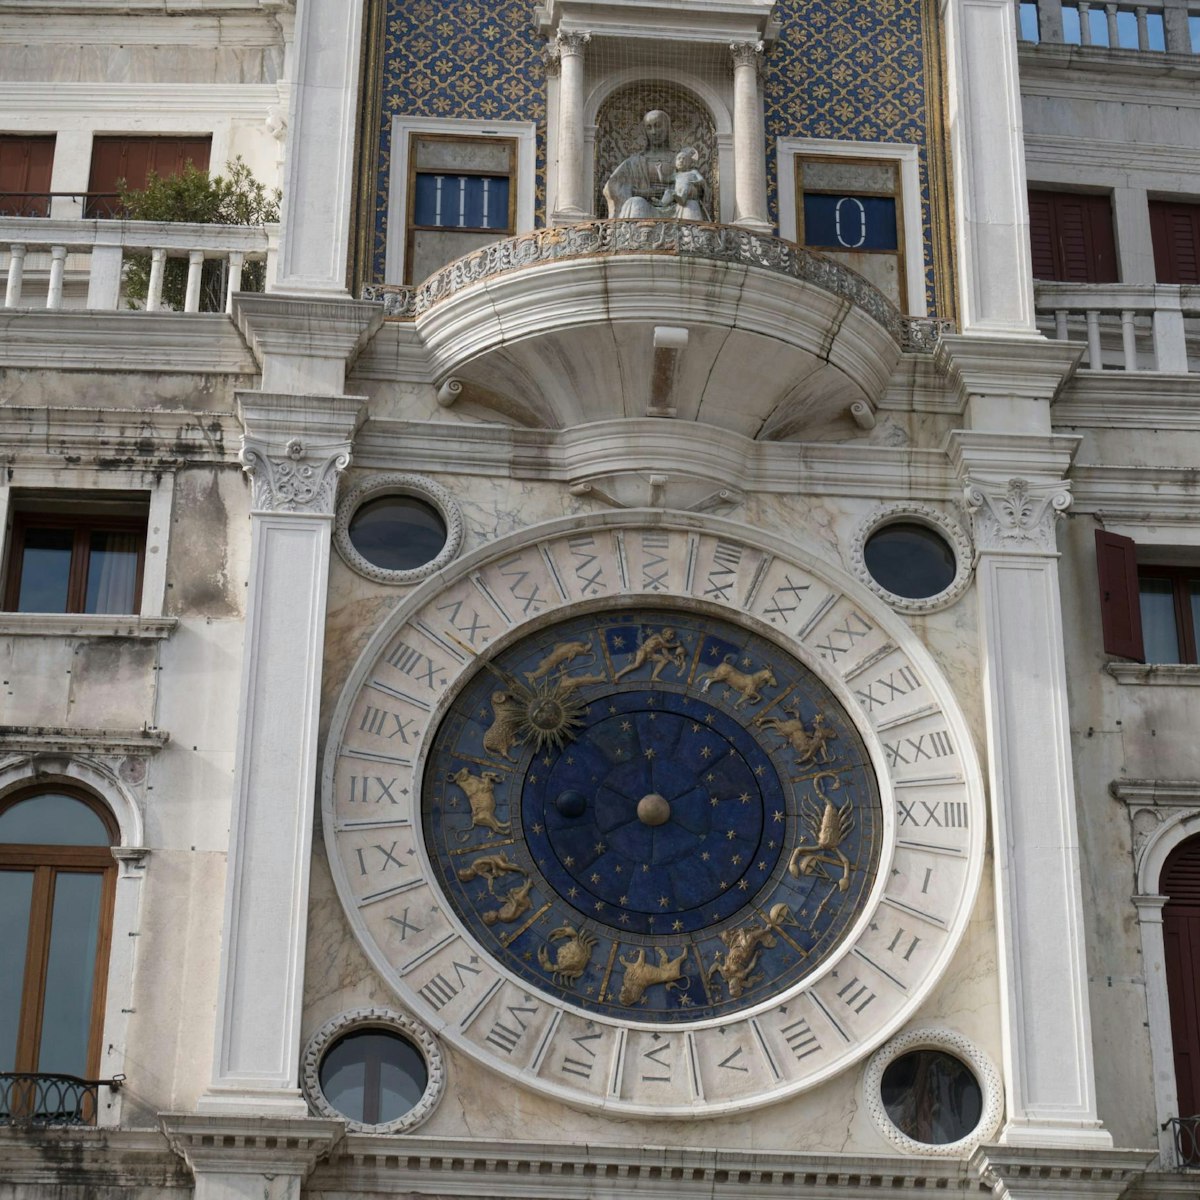 Torre dell'Orologio, the clock face shows both the hours and signs of the zodiac